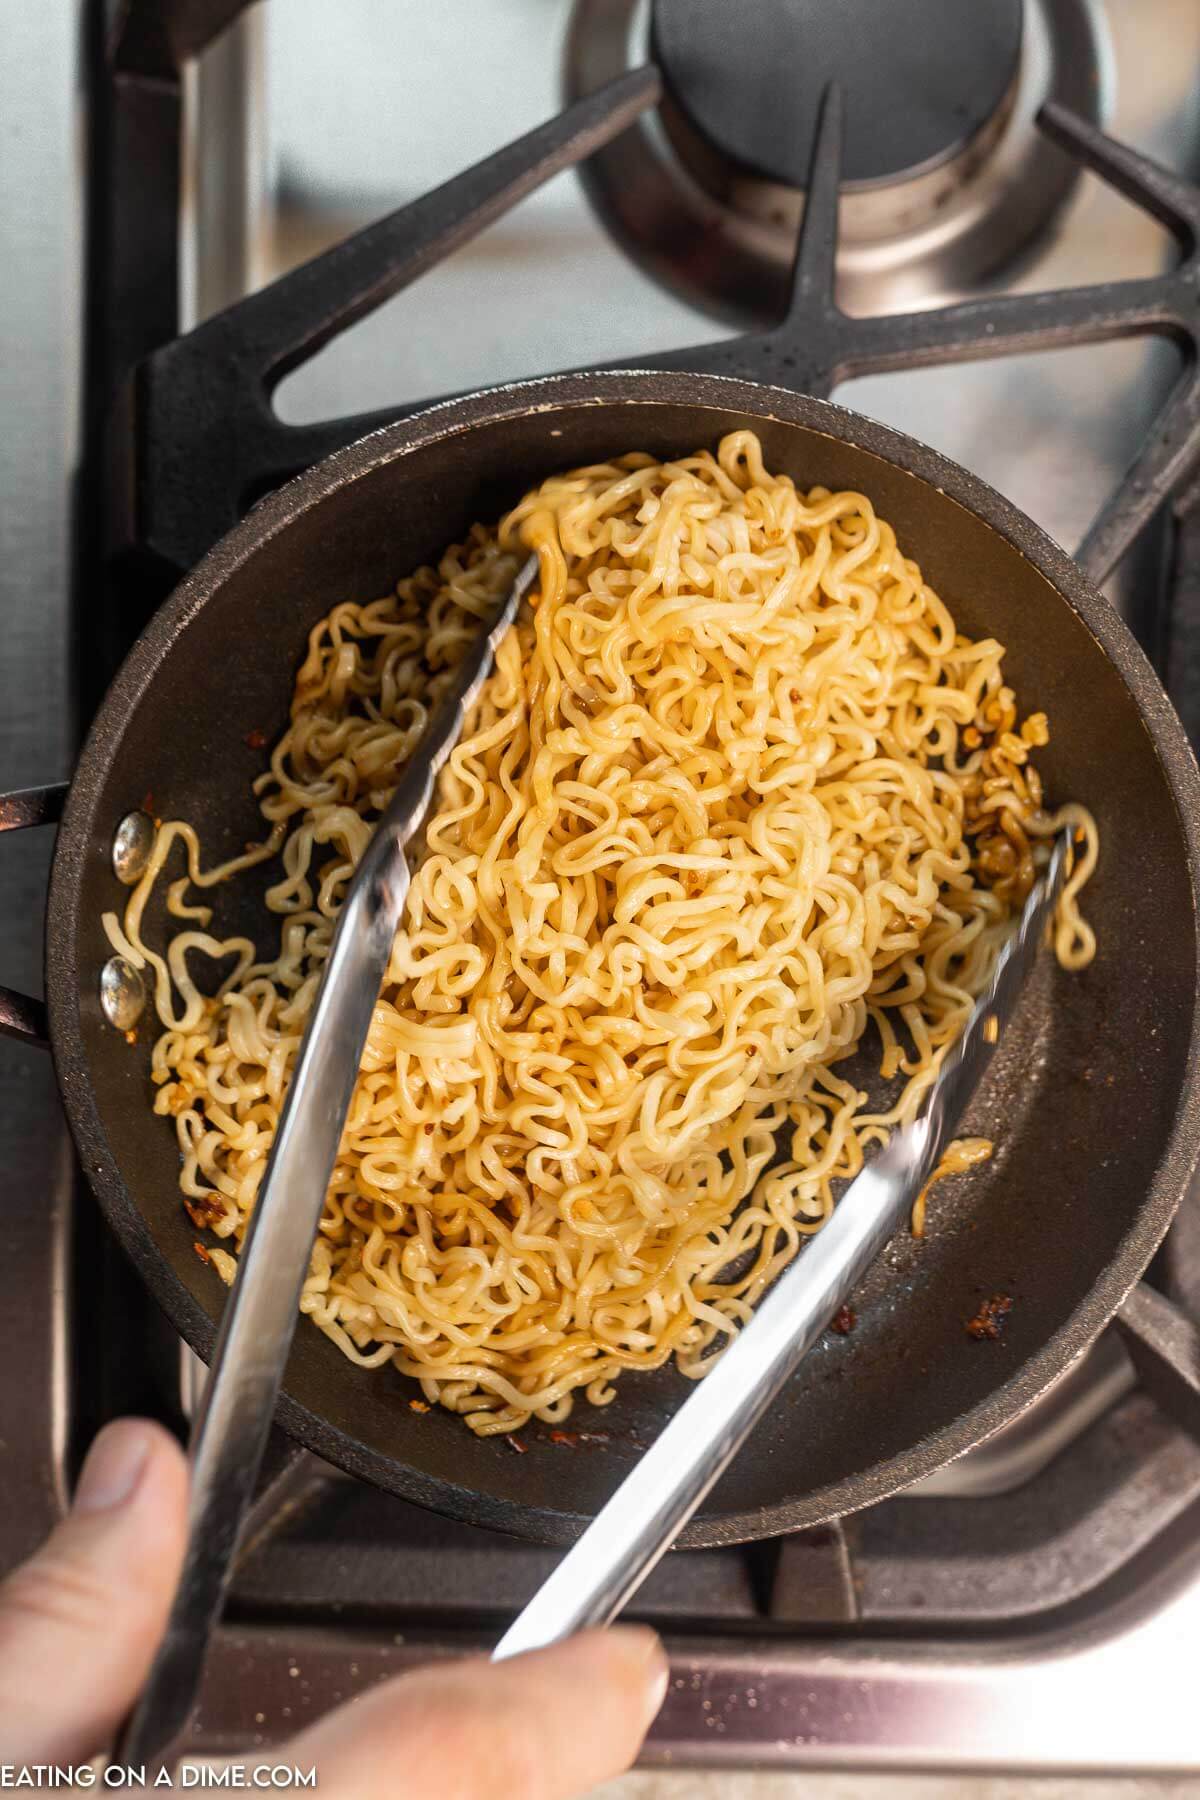 Toss the noodles in with the glaze